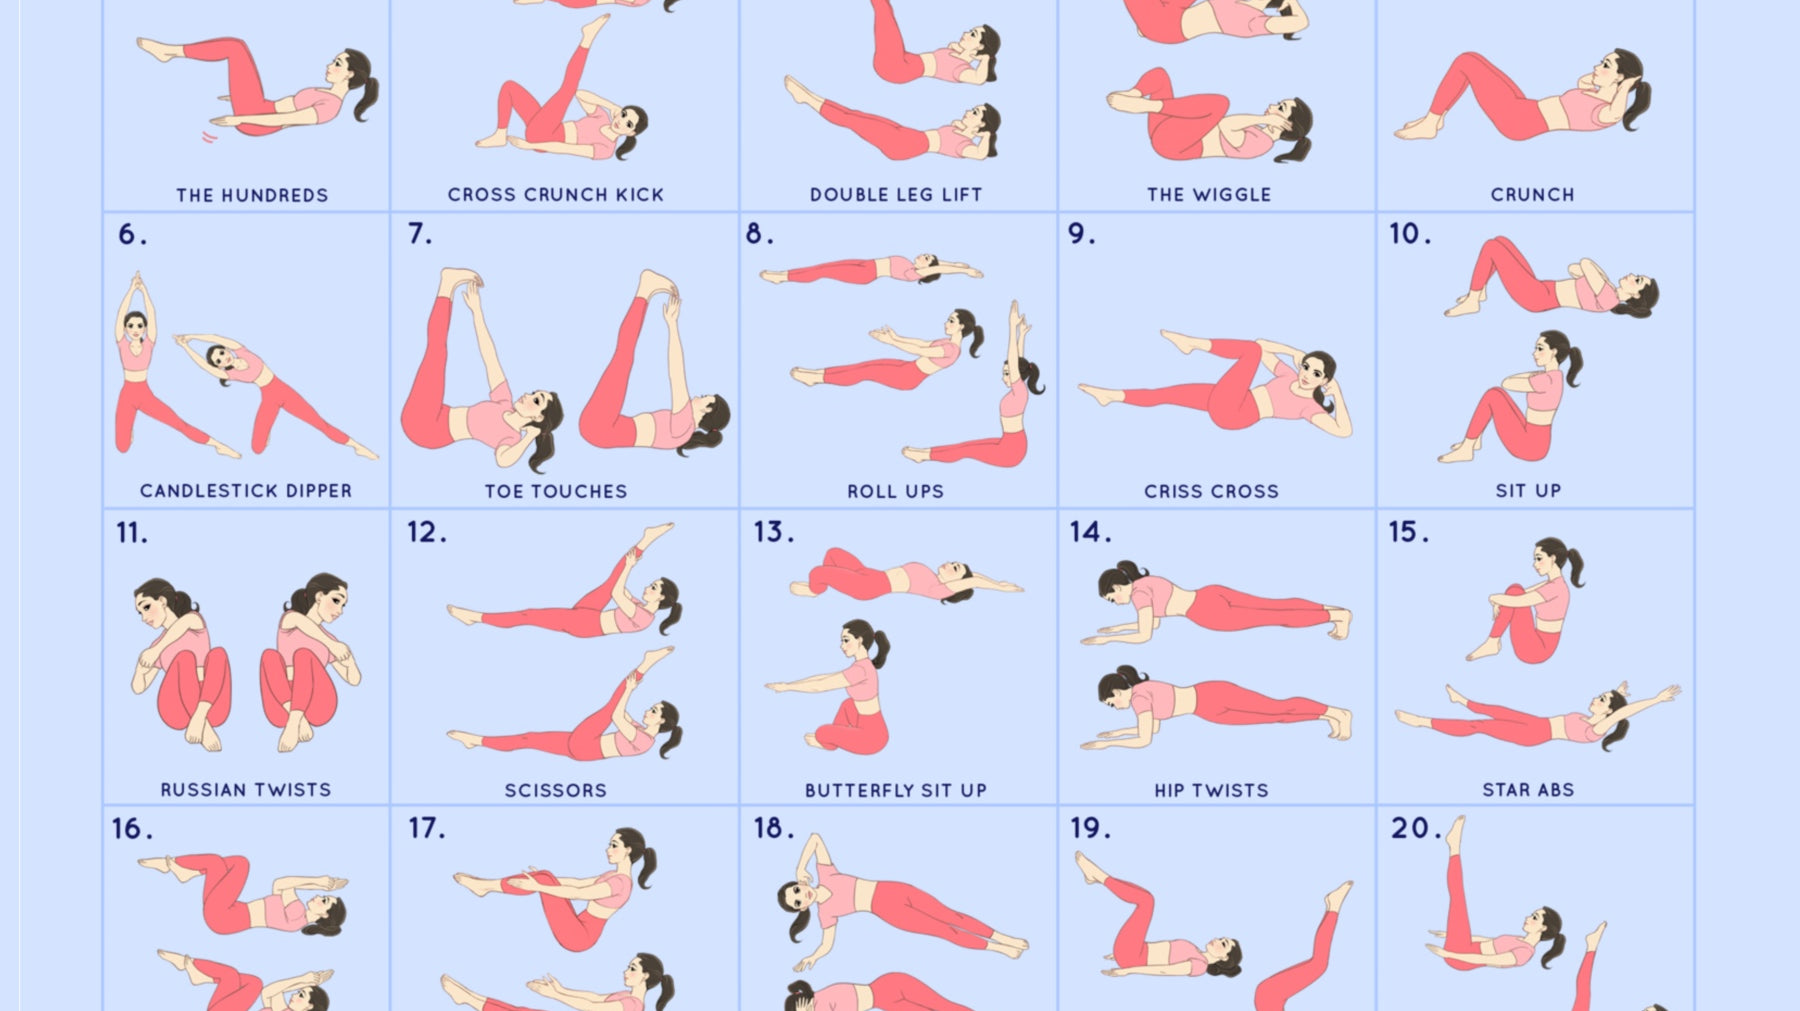 People Swear By This 30 Day Ab Challenge